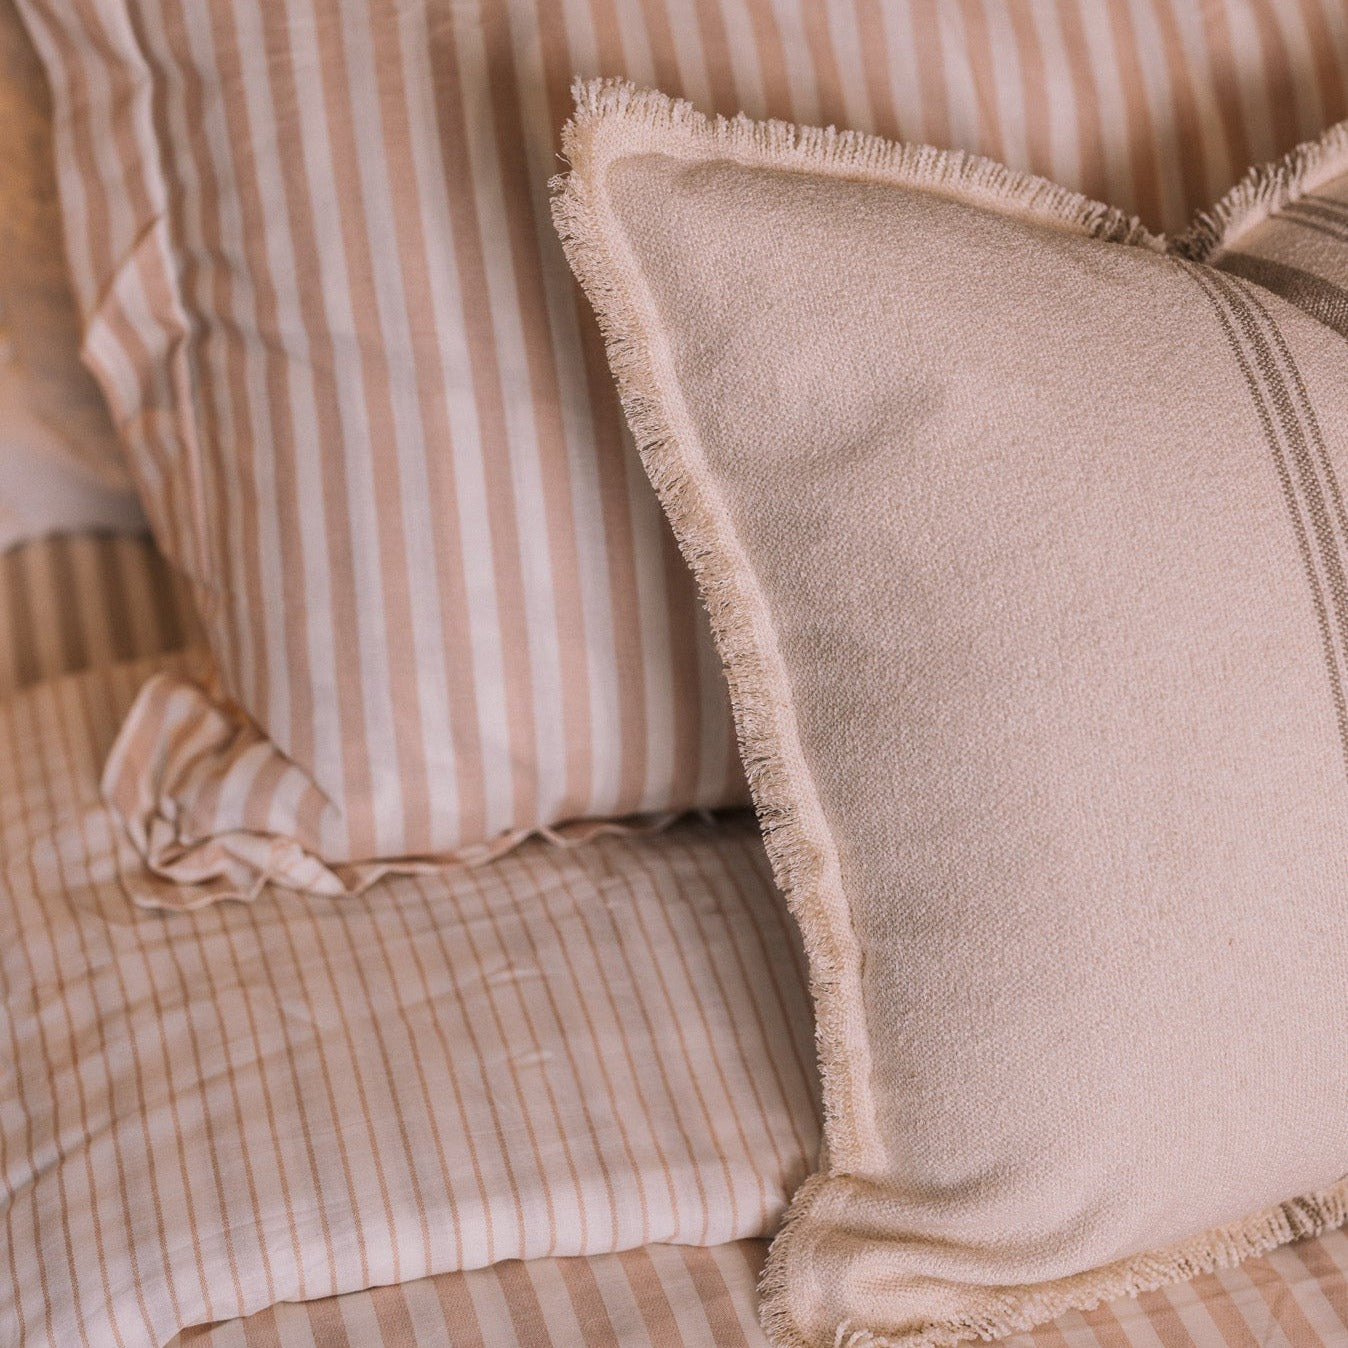 Blush pink striped bedding in a neutral bedroom with a brass bed.